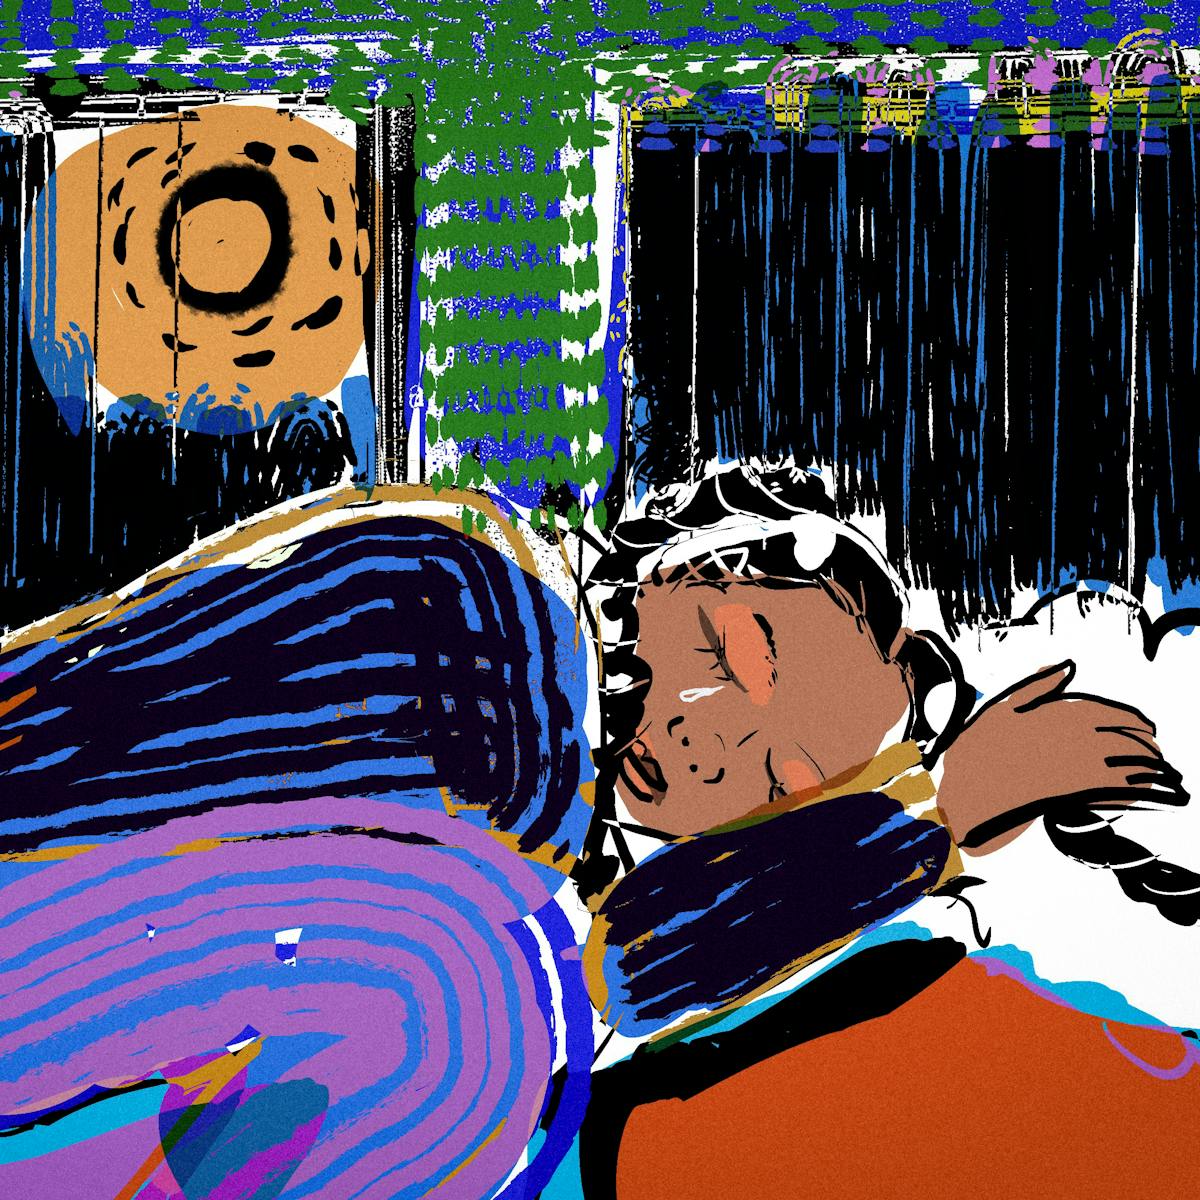 Colourful artwork. The image shows a young woman asleep in the foetal position, lying underneath a cover in her bedroom. Her hair is in two braids and her head is resting on a cloud. She looks calm. Through her bedroom windows the sun is shining. 